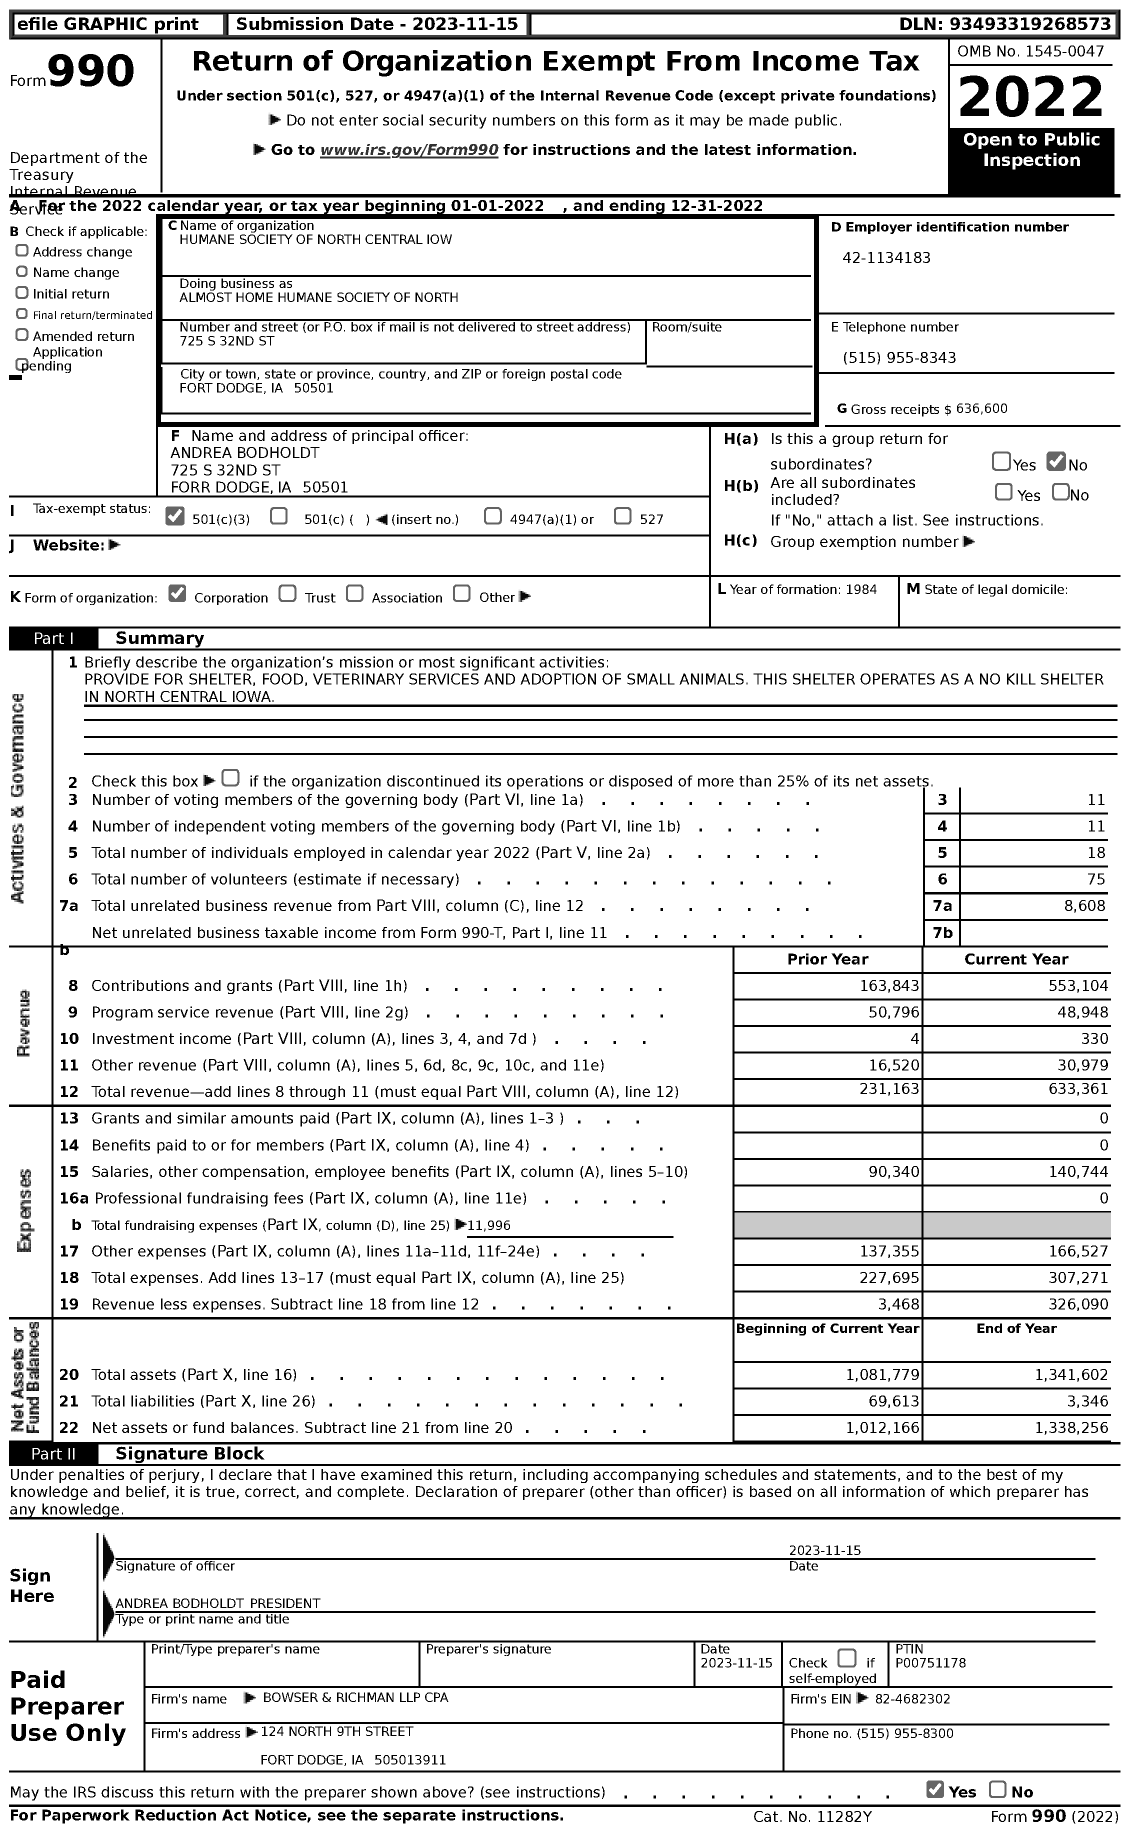 Image of first page of 2022 Form 990 for Almost Home Humane Society of North